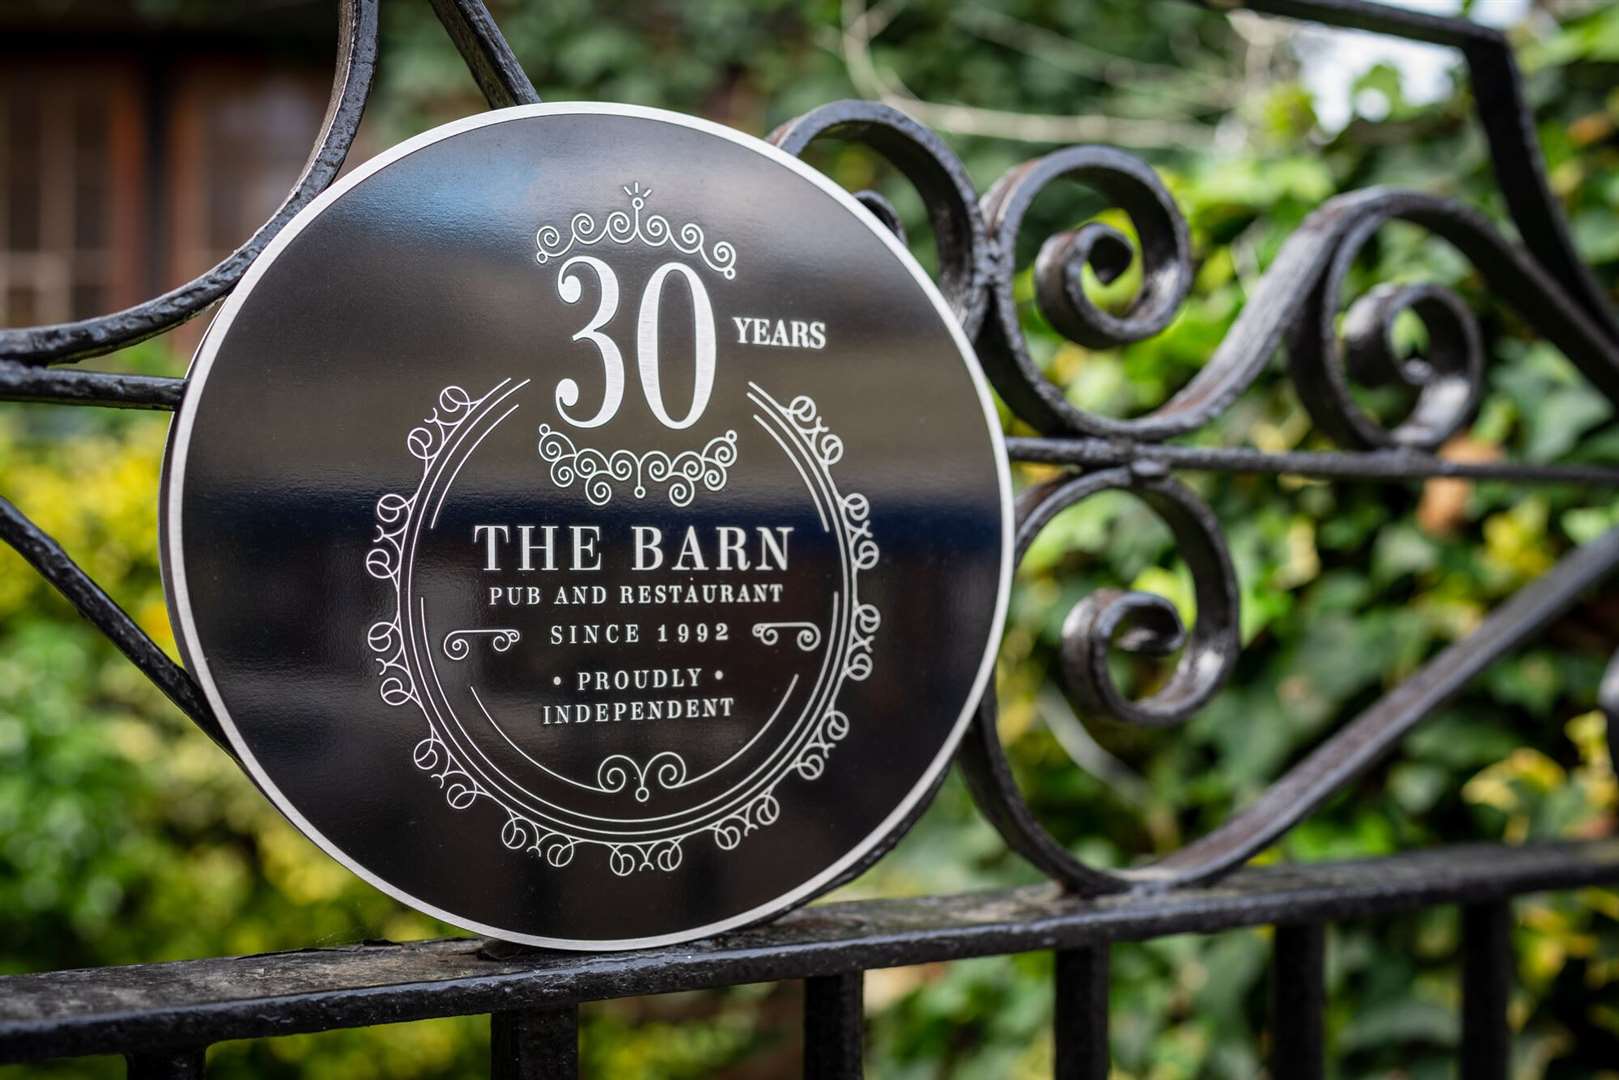 Janet and Philippe Sorak are celebrating 30 years as general managers of The Barn in Tunbridge Wells